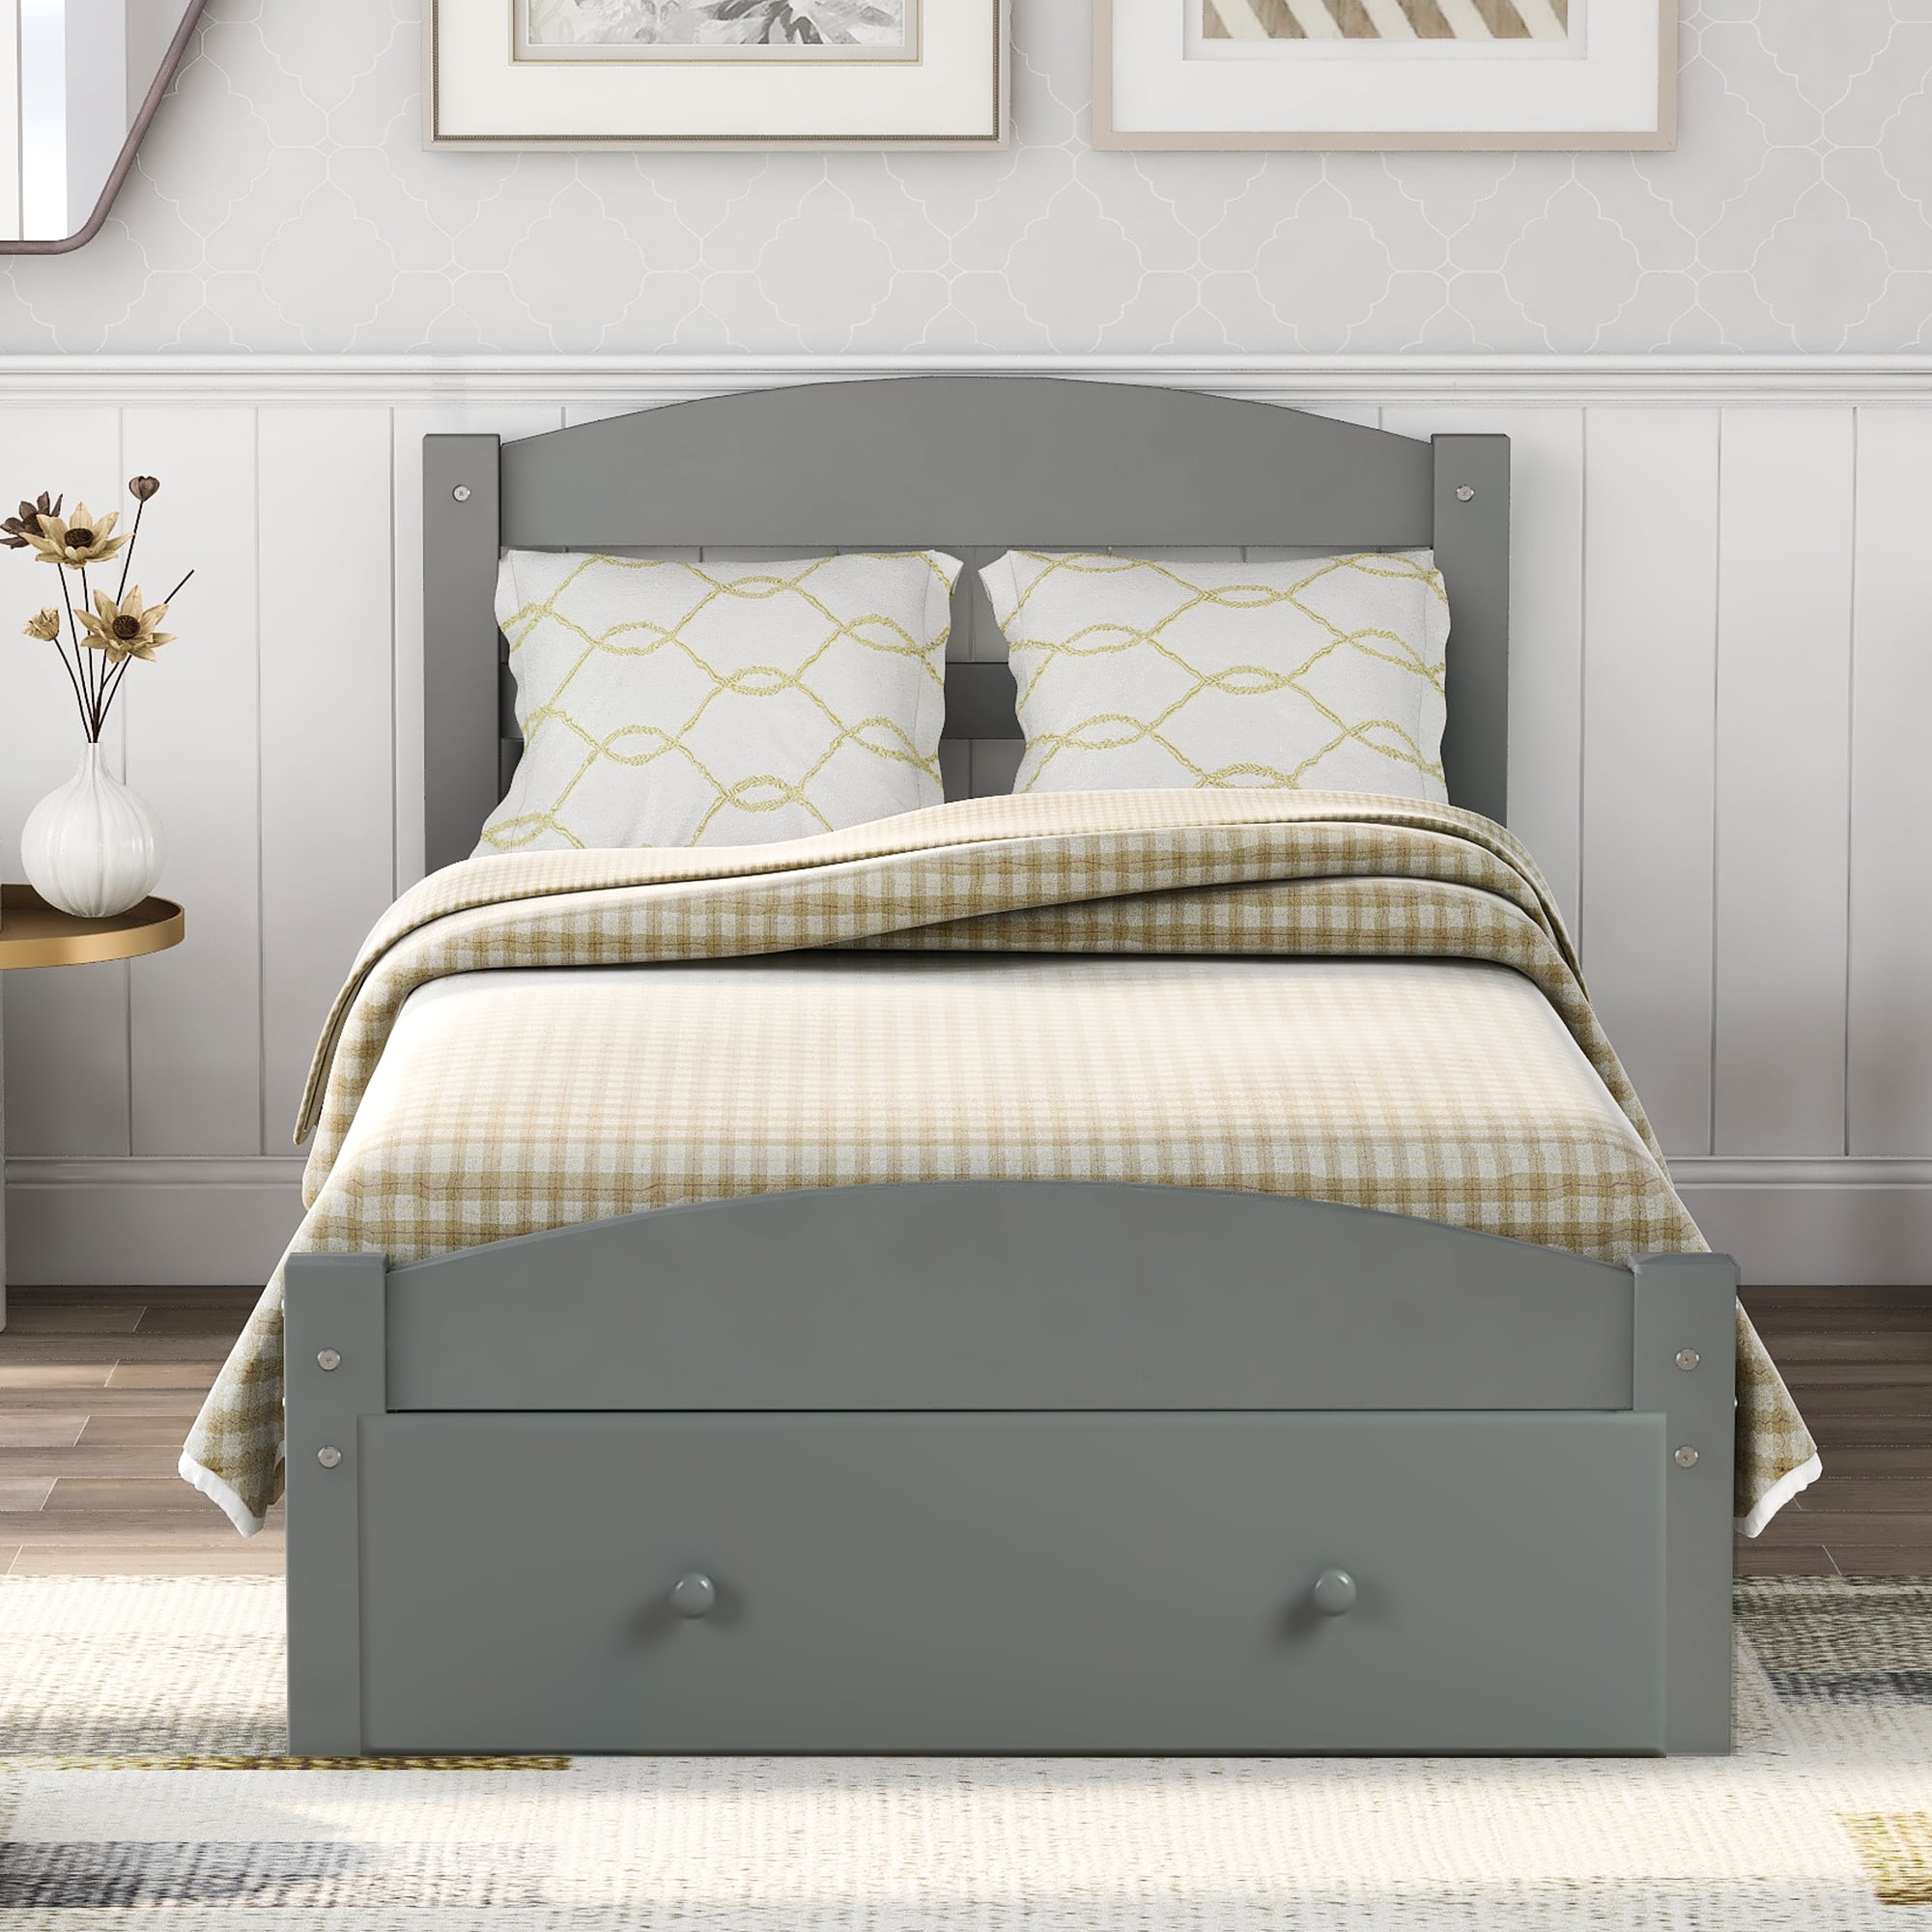 Grey Wood Bed Frame with Pine Finish Headboard & Footboard in Range of Sizes Double